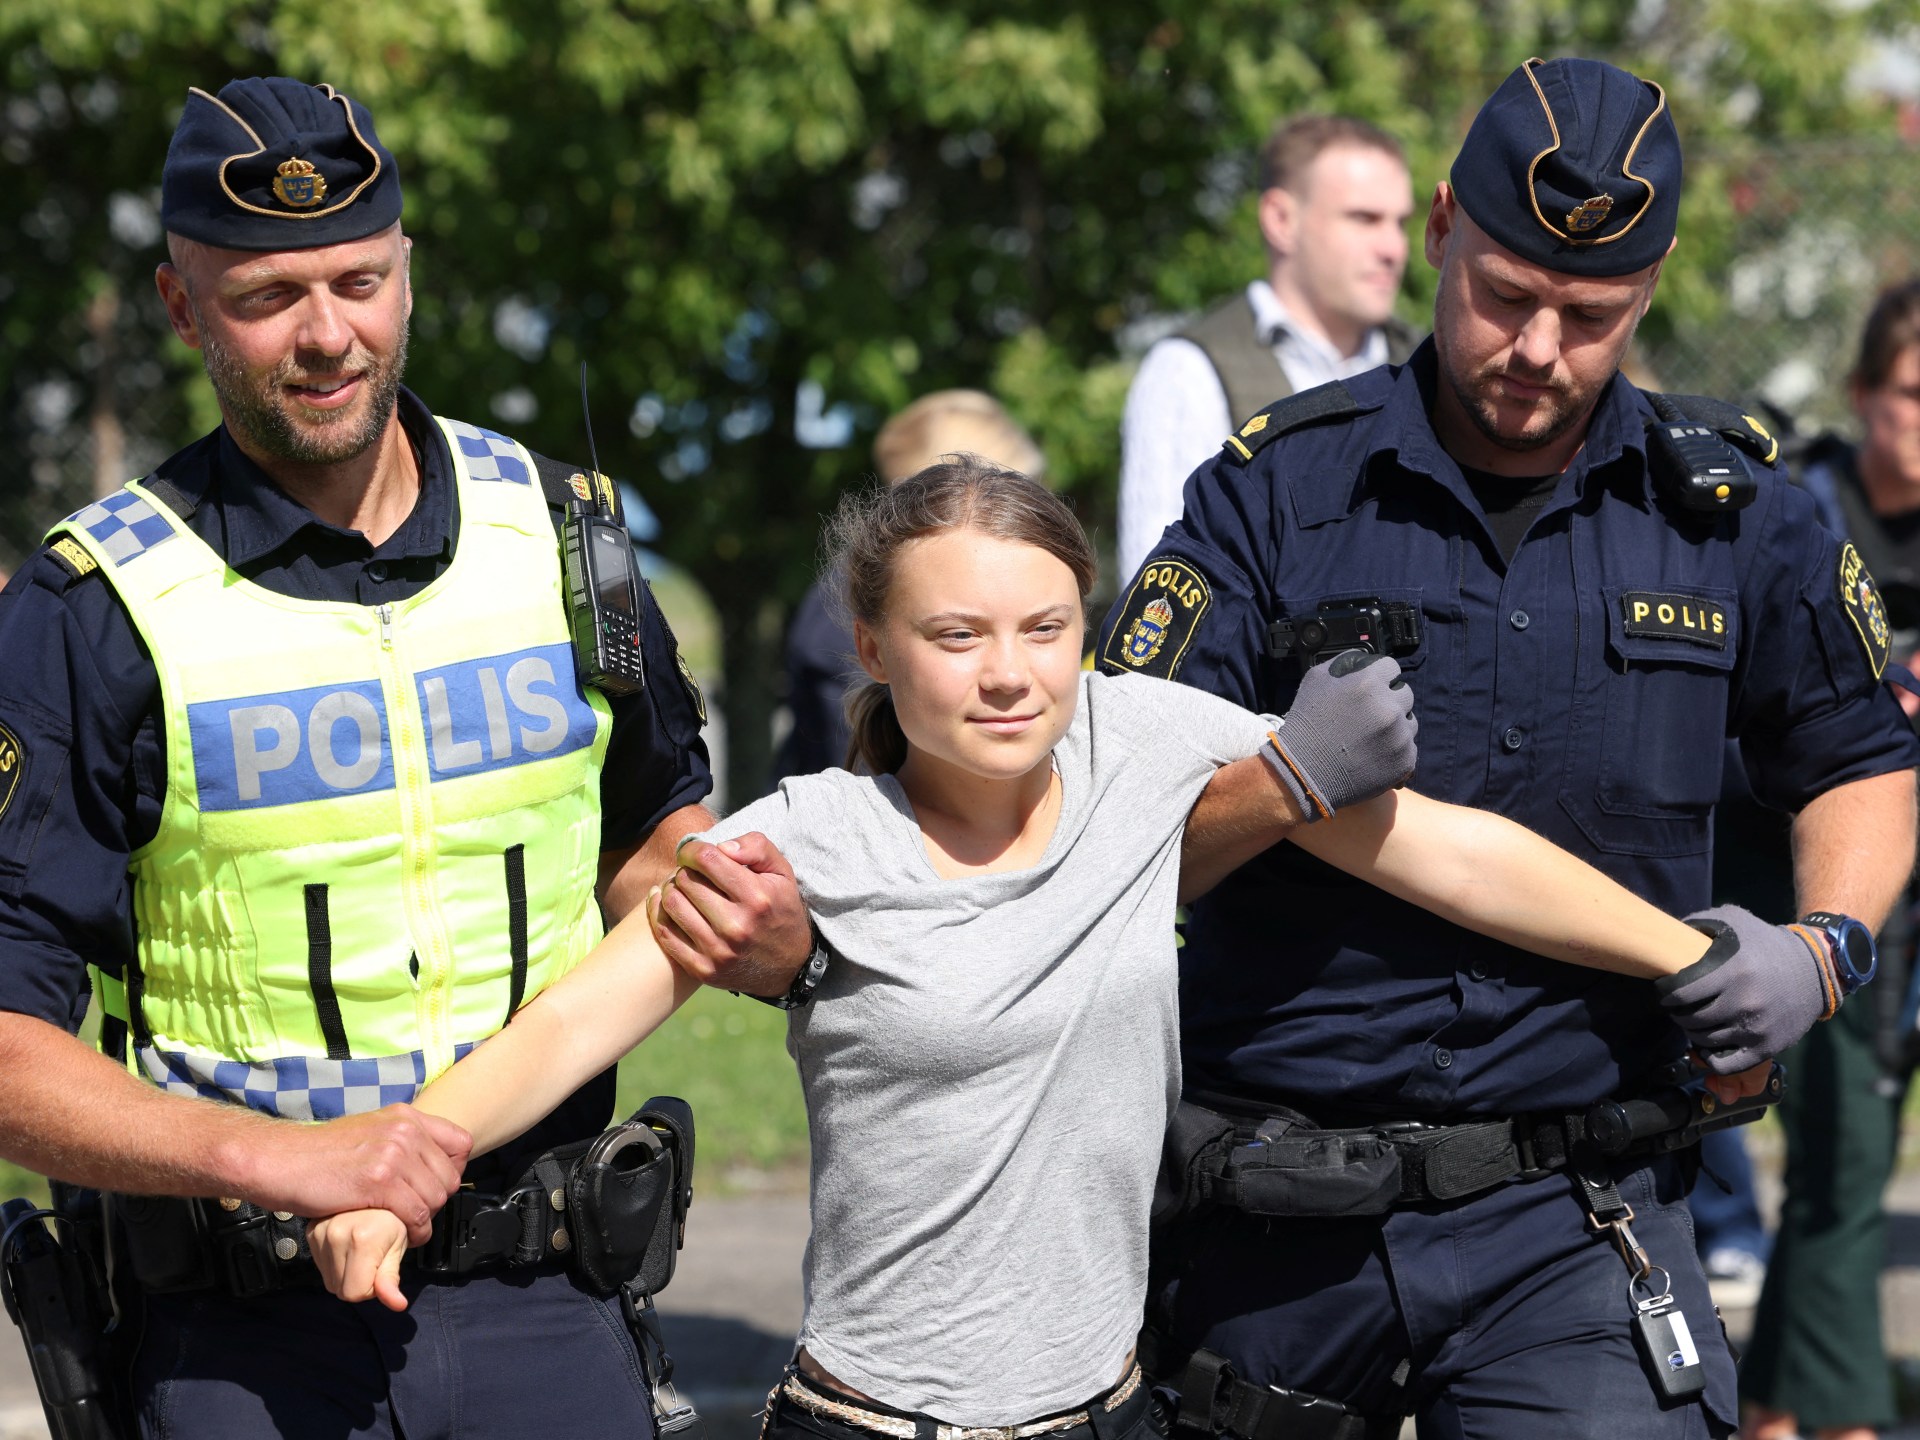 Greta Thunberg forcibly removed from climate protest after being fined |  Climate crisis news